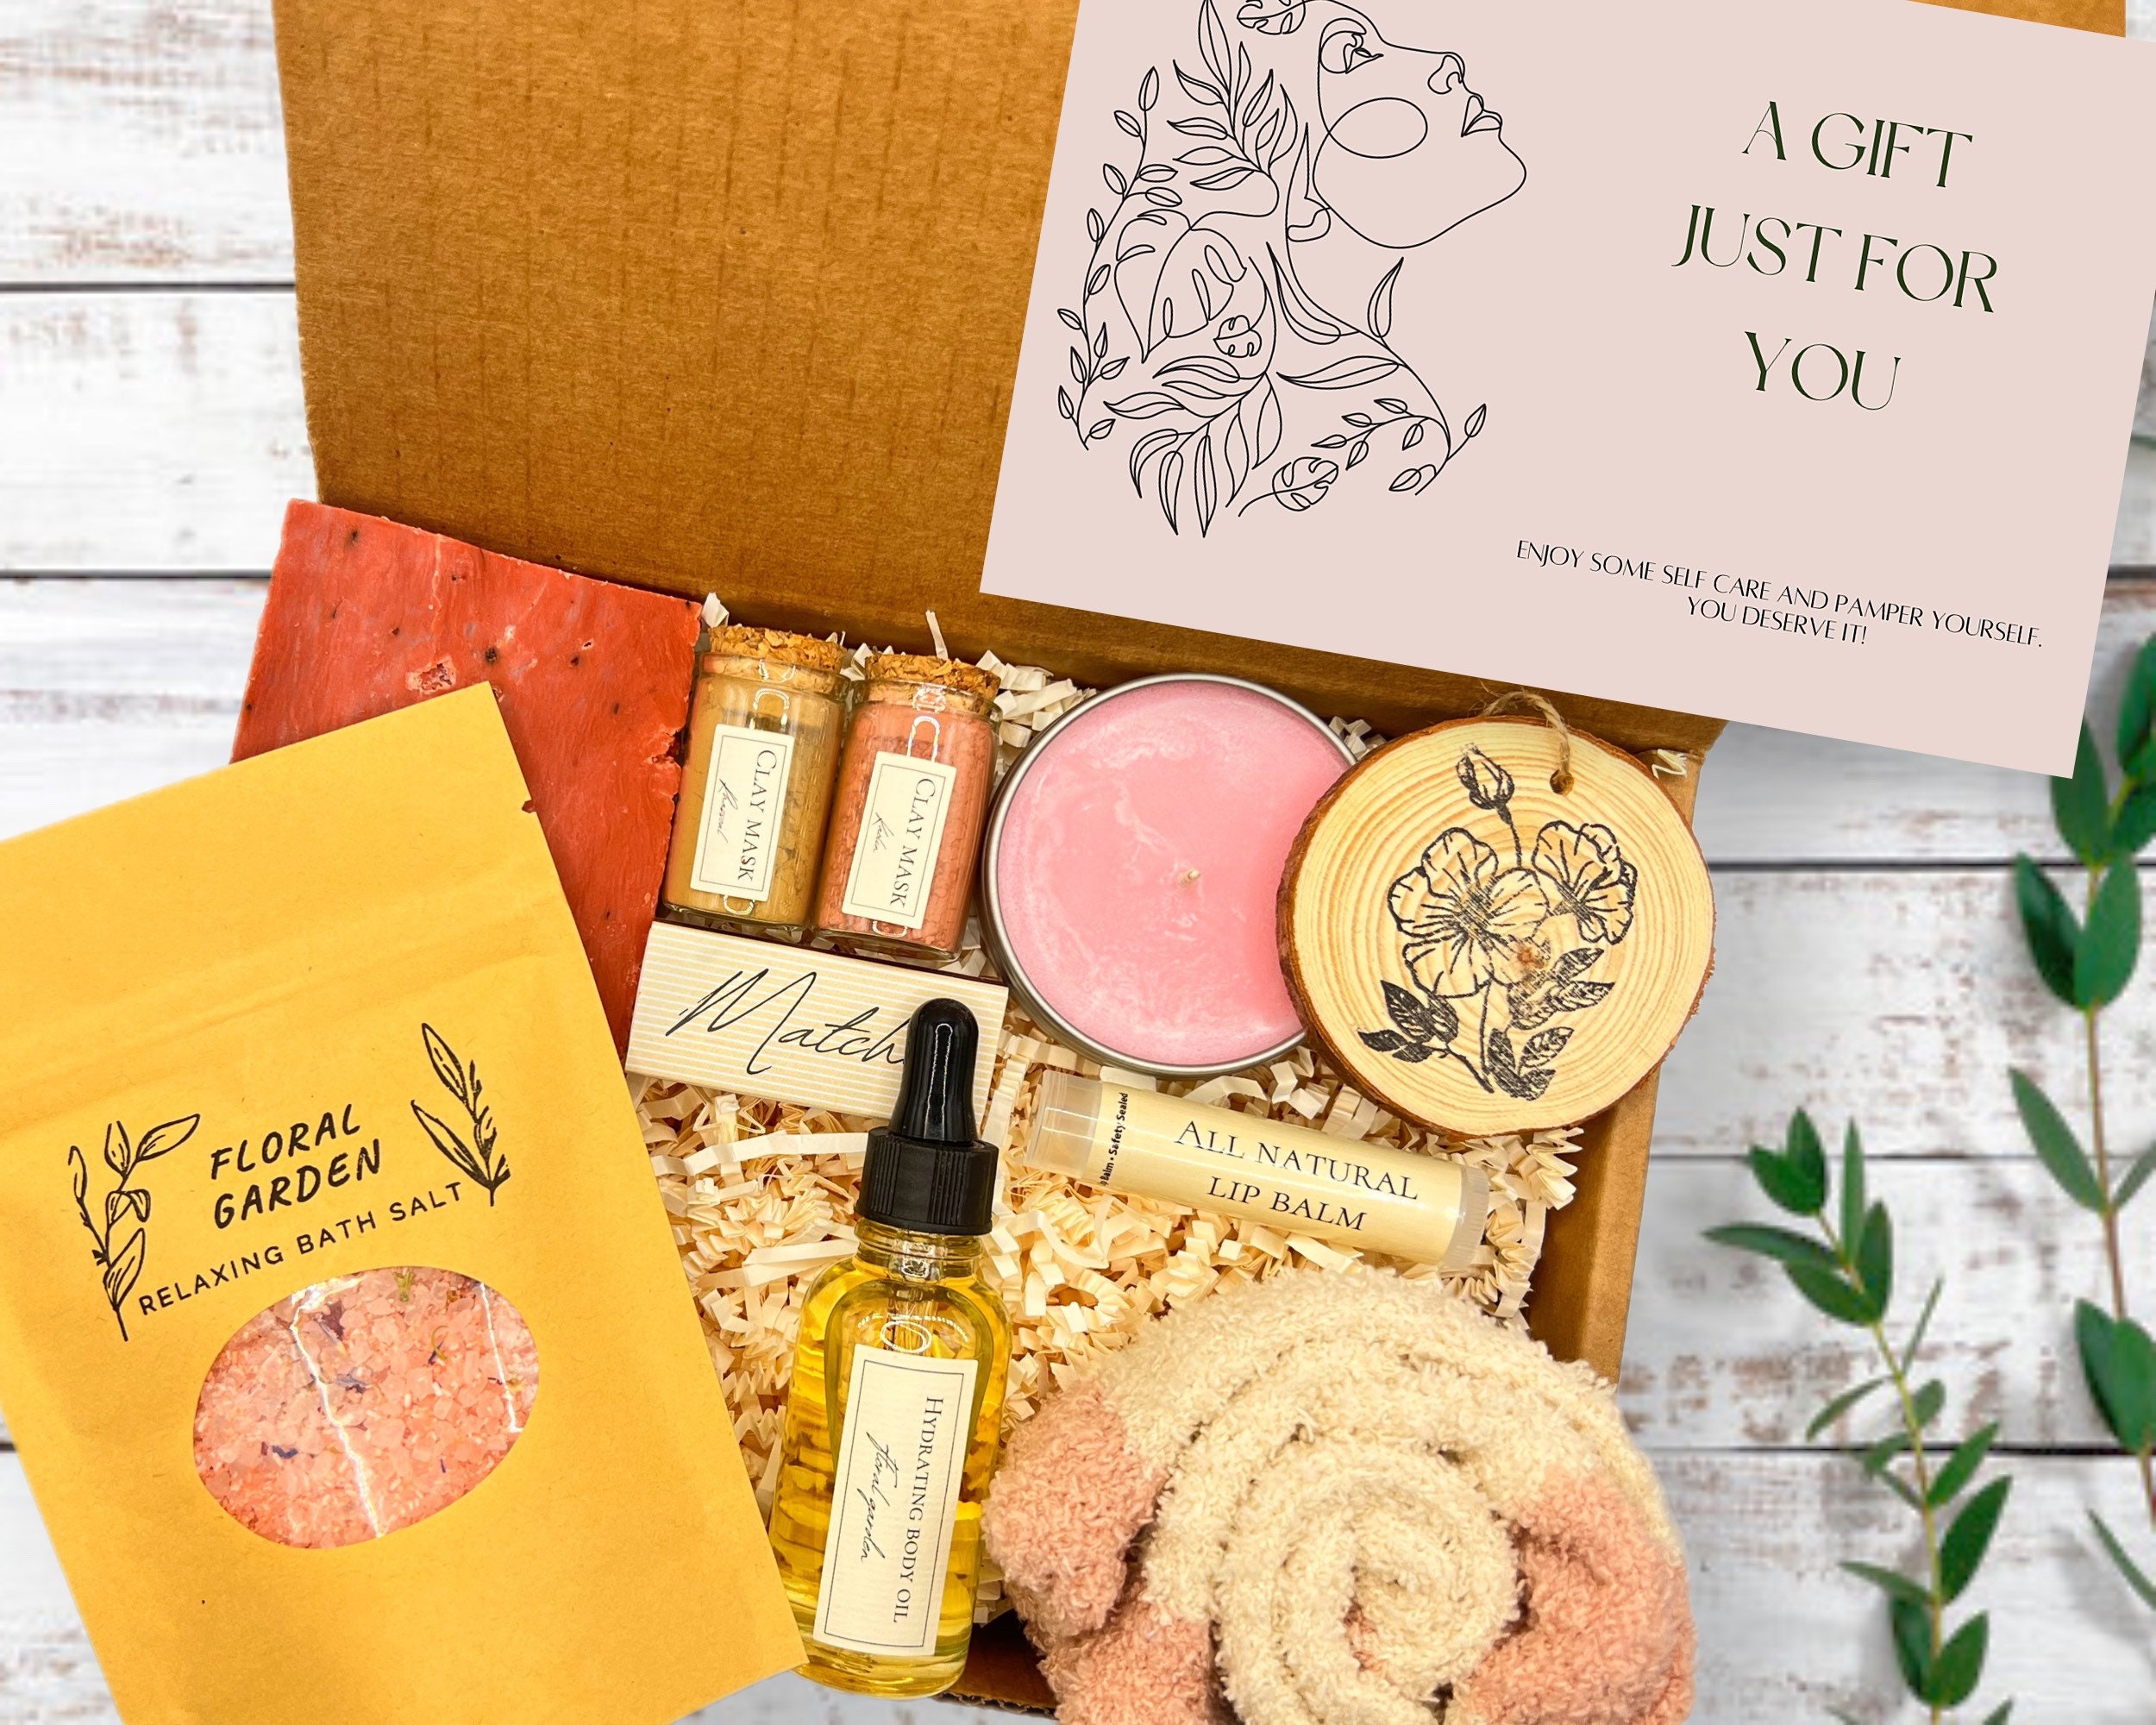 Gift Box Birthday for Women - Relaxing Spa Giftbox Basket for Her - Mom,  Wife, Sister, Best Friend, and Girlfriend Unique Bath Set Self Care Gift